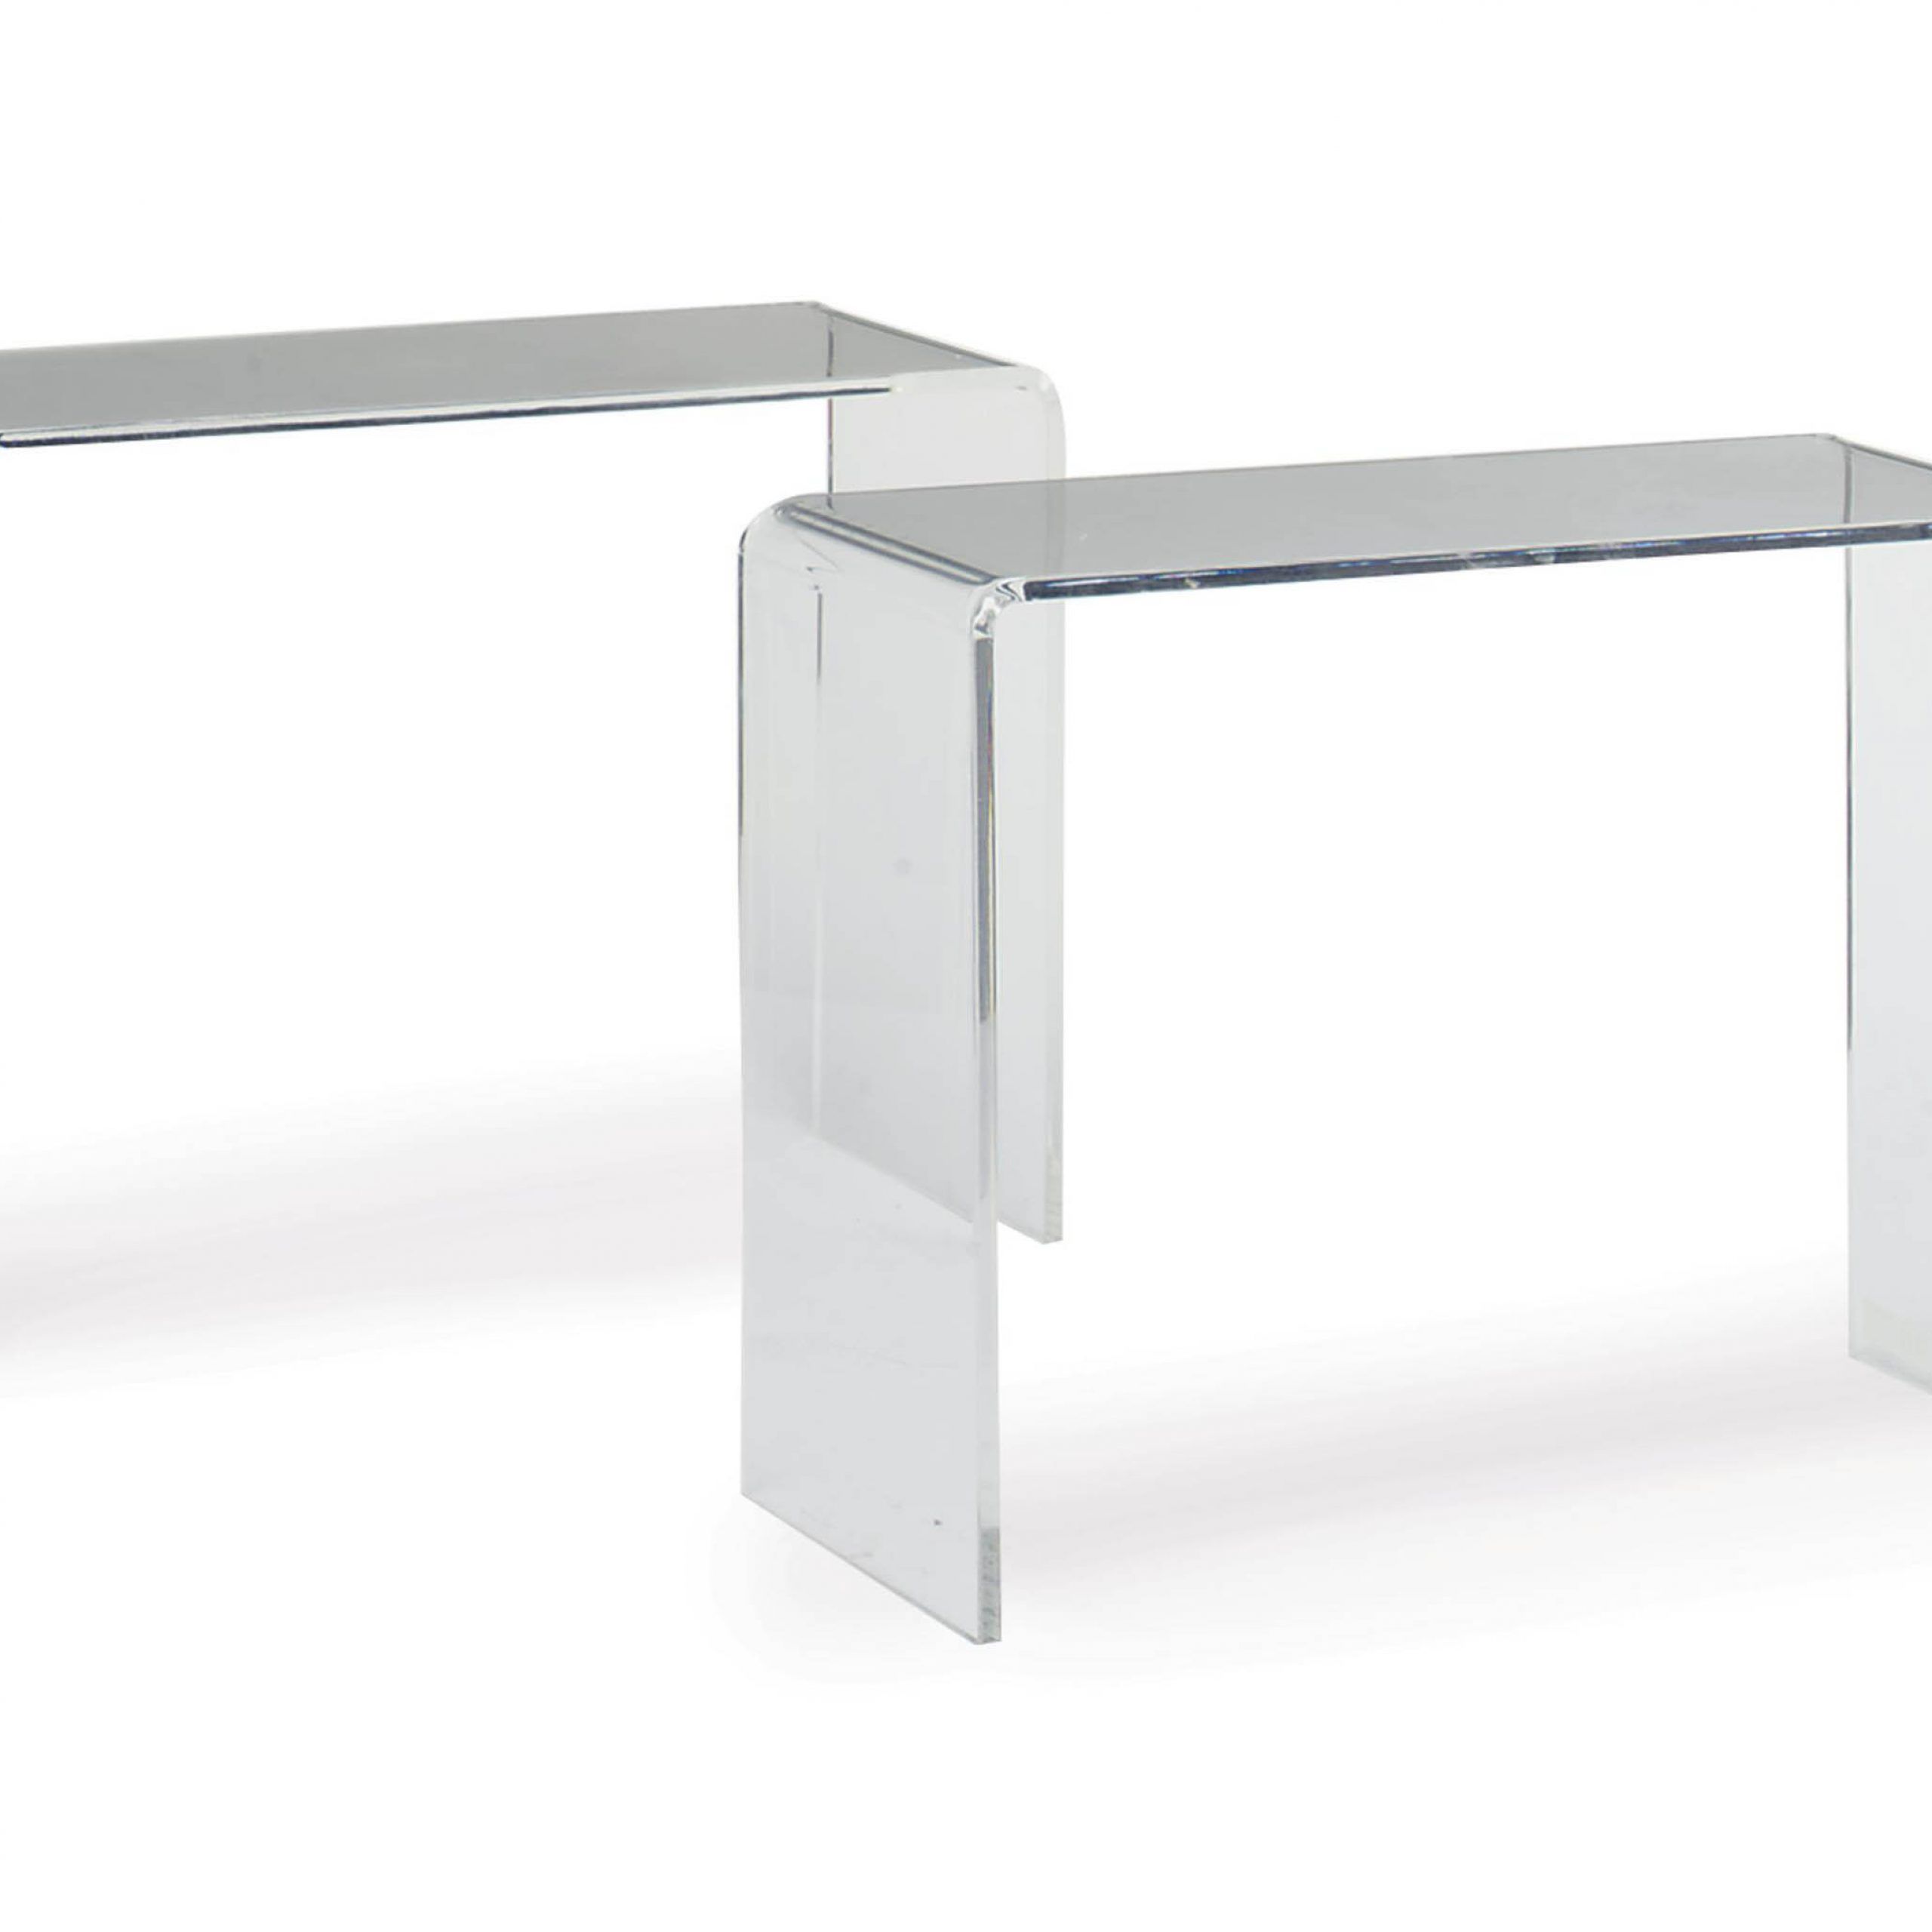 A Pair Of Clear Acrylic Console Tables, , Modern | Christie's Intended For Clear Console Tables (View 17 of 20)